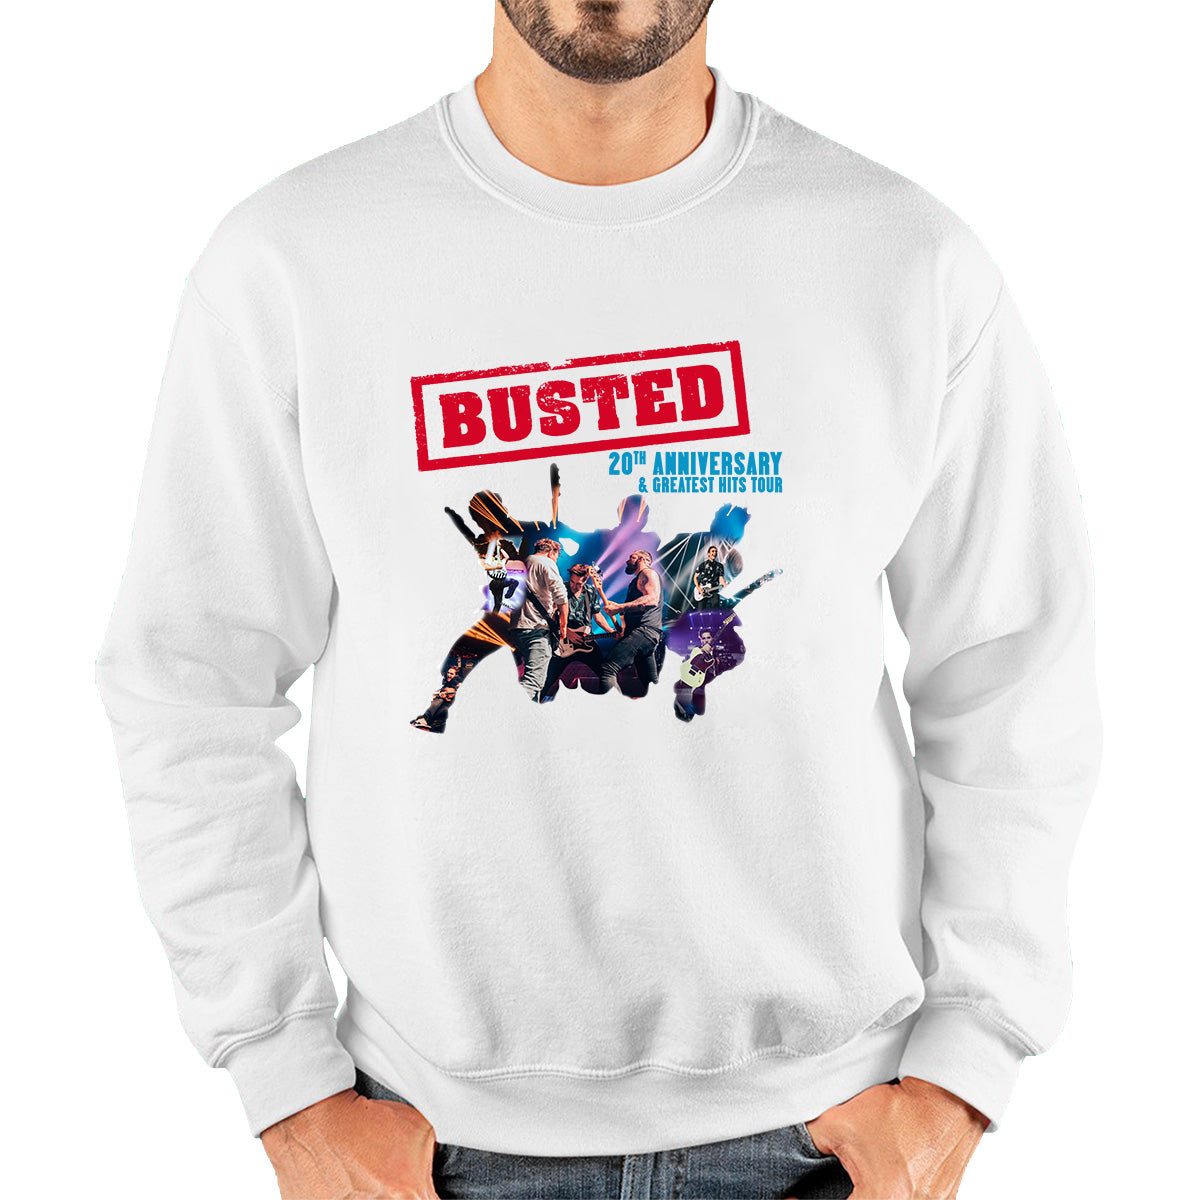 Busted 20th Anniversary & Greatest Hits Tour Busted Singers Pop Punk Music Band Unisex Sweatshirt